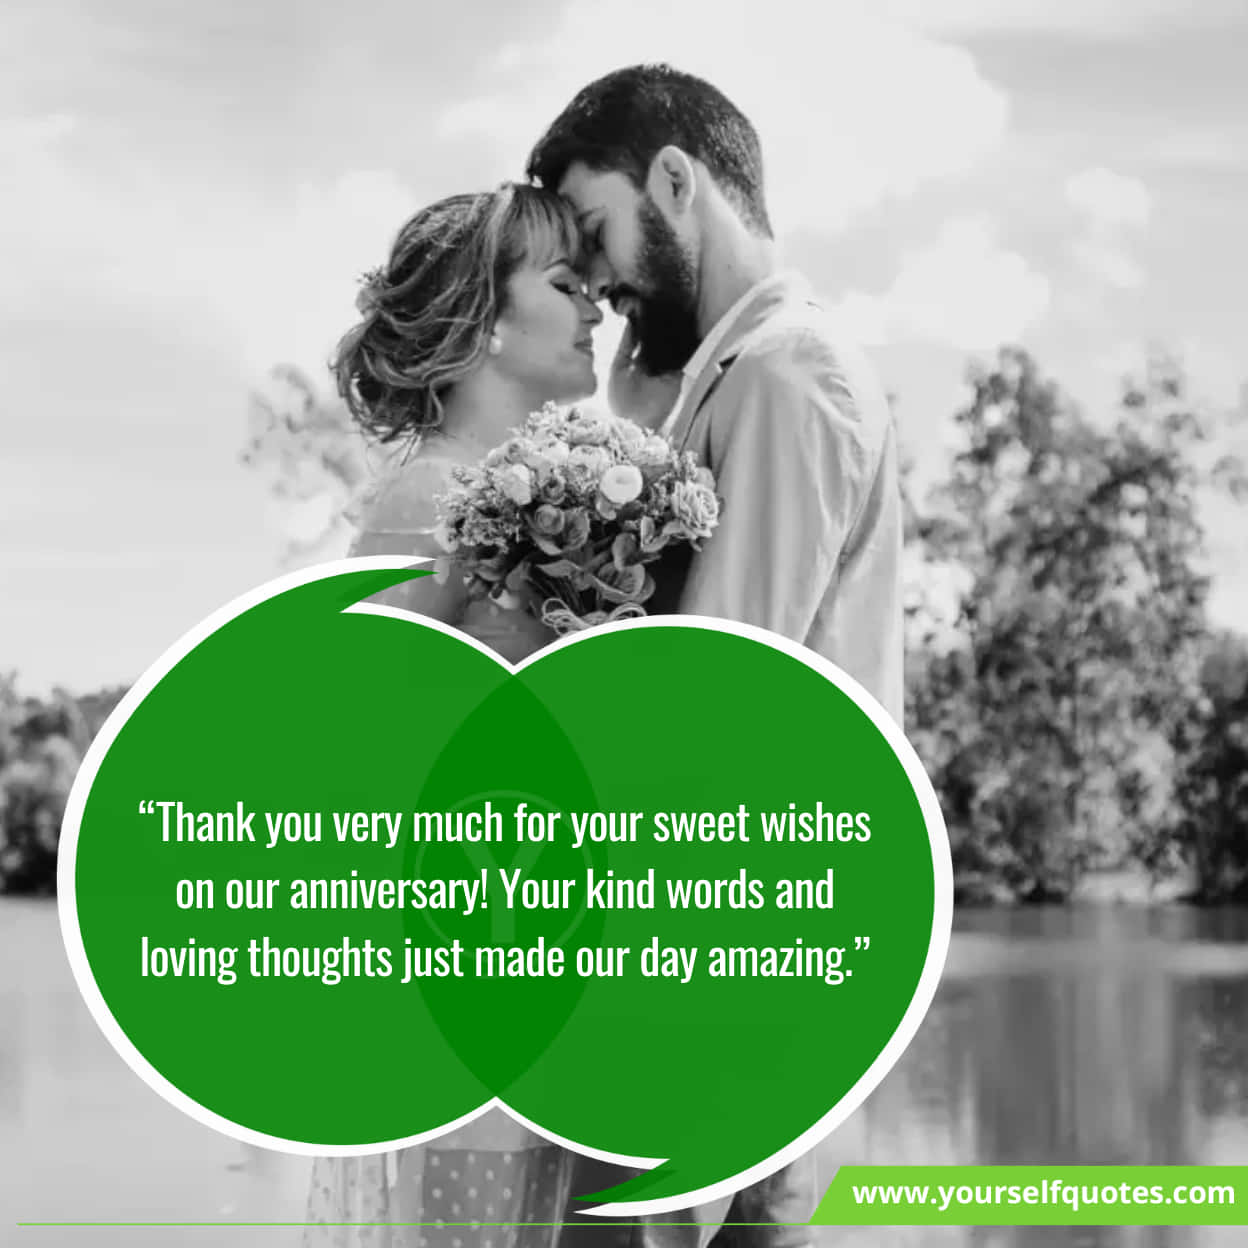 Best Thank You Messages for Anniversary